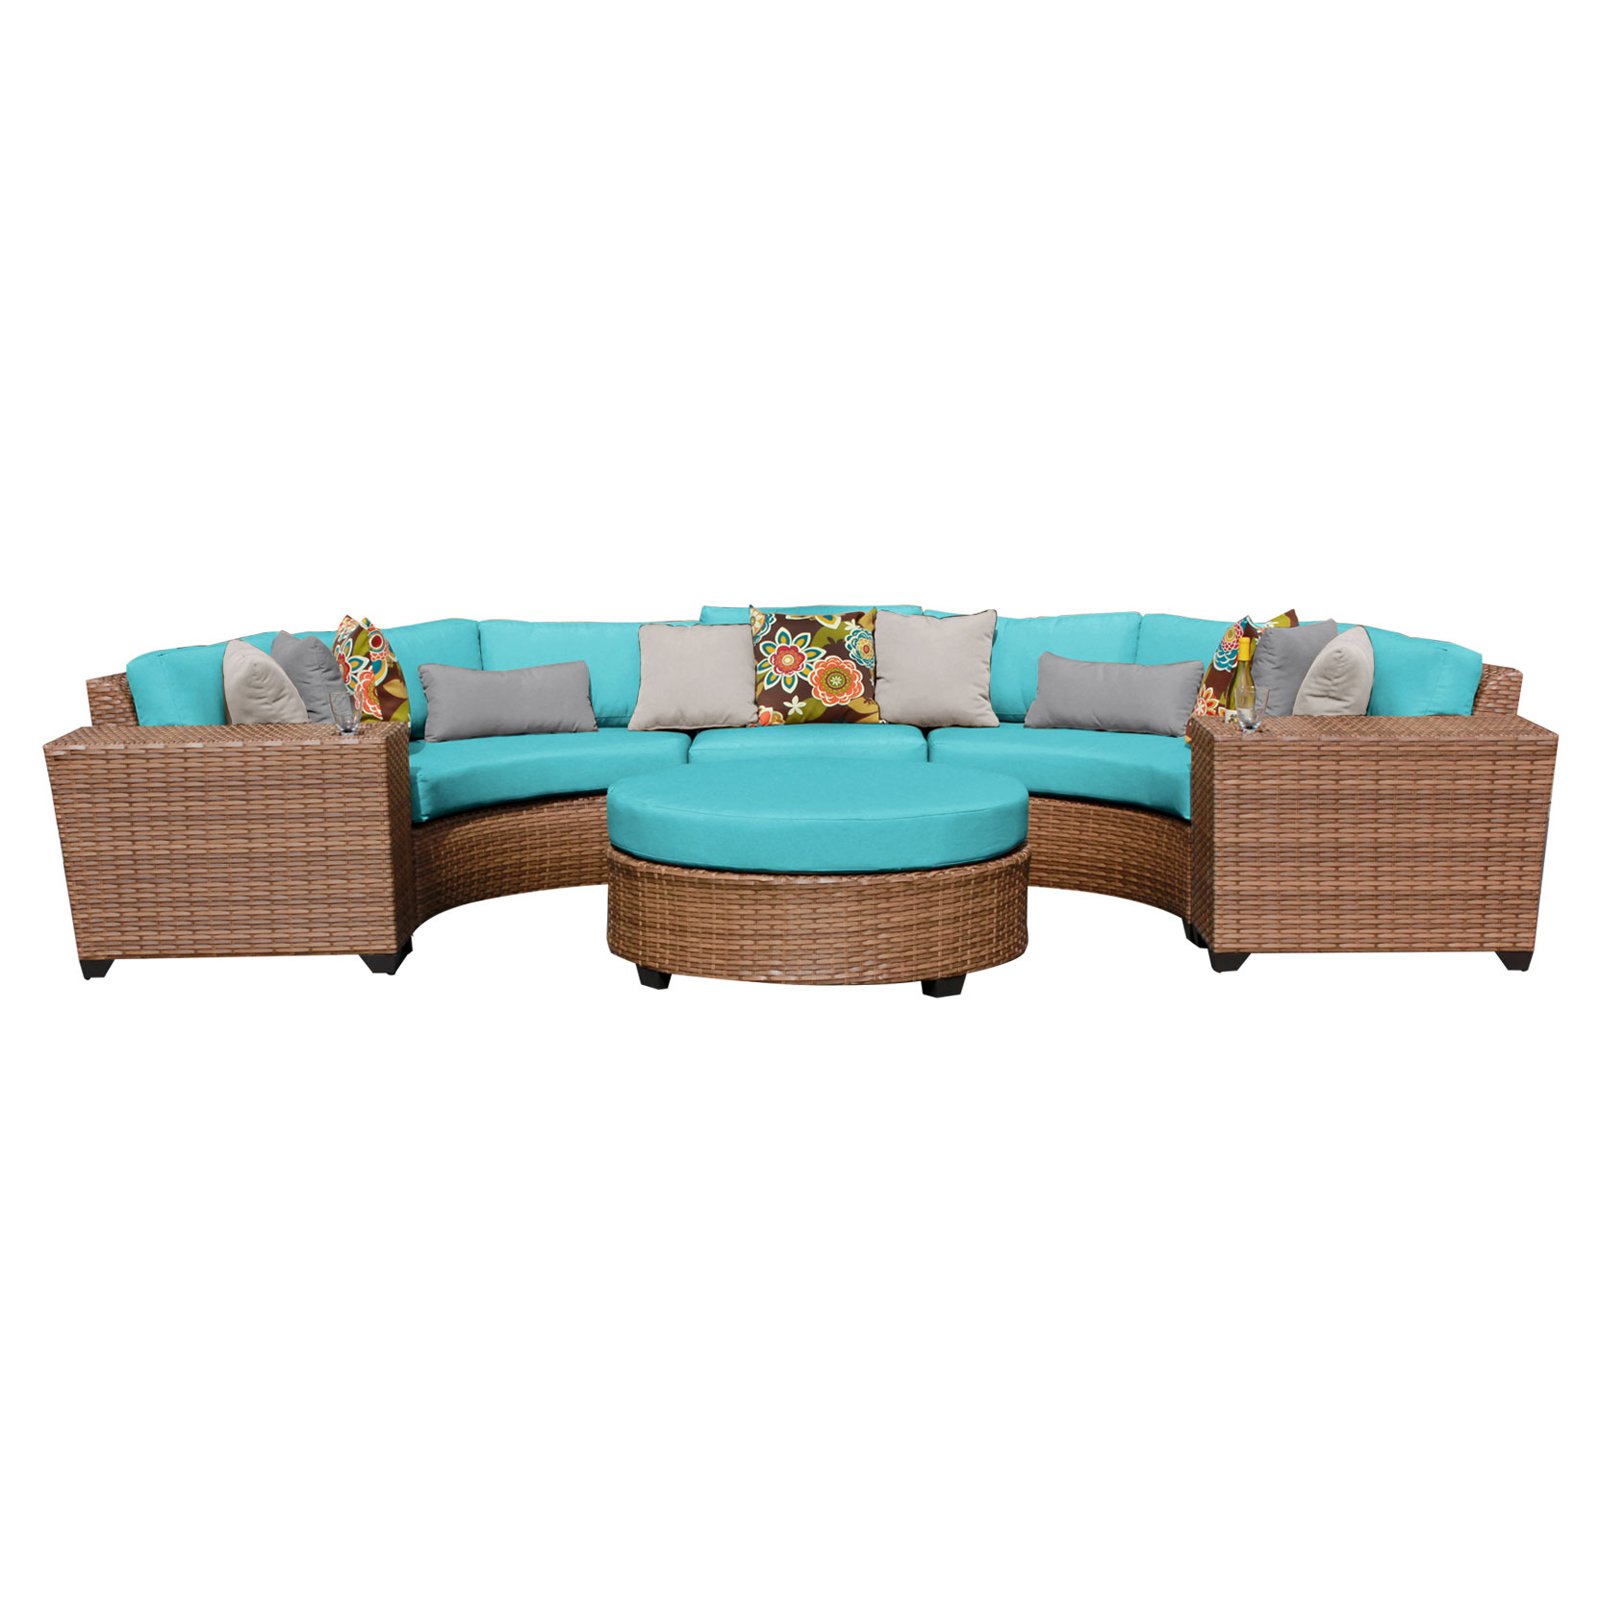 TK Classics Laguna Wicker 6 Piece Patio Conversation Set with Round Coffee Table and 2 Sets of Cushion Covers - image 1 of 3